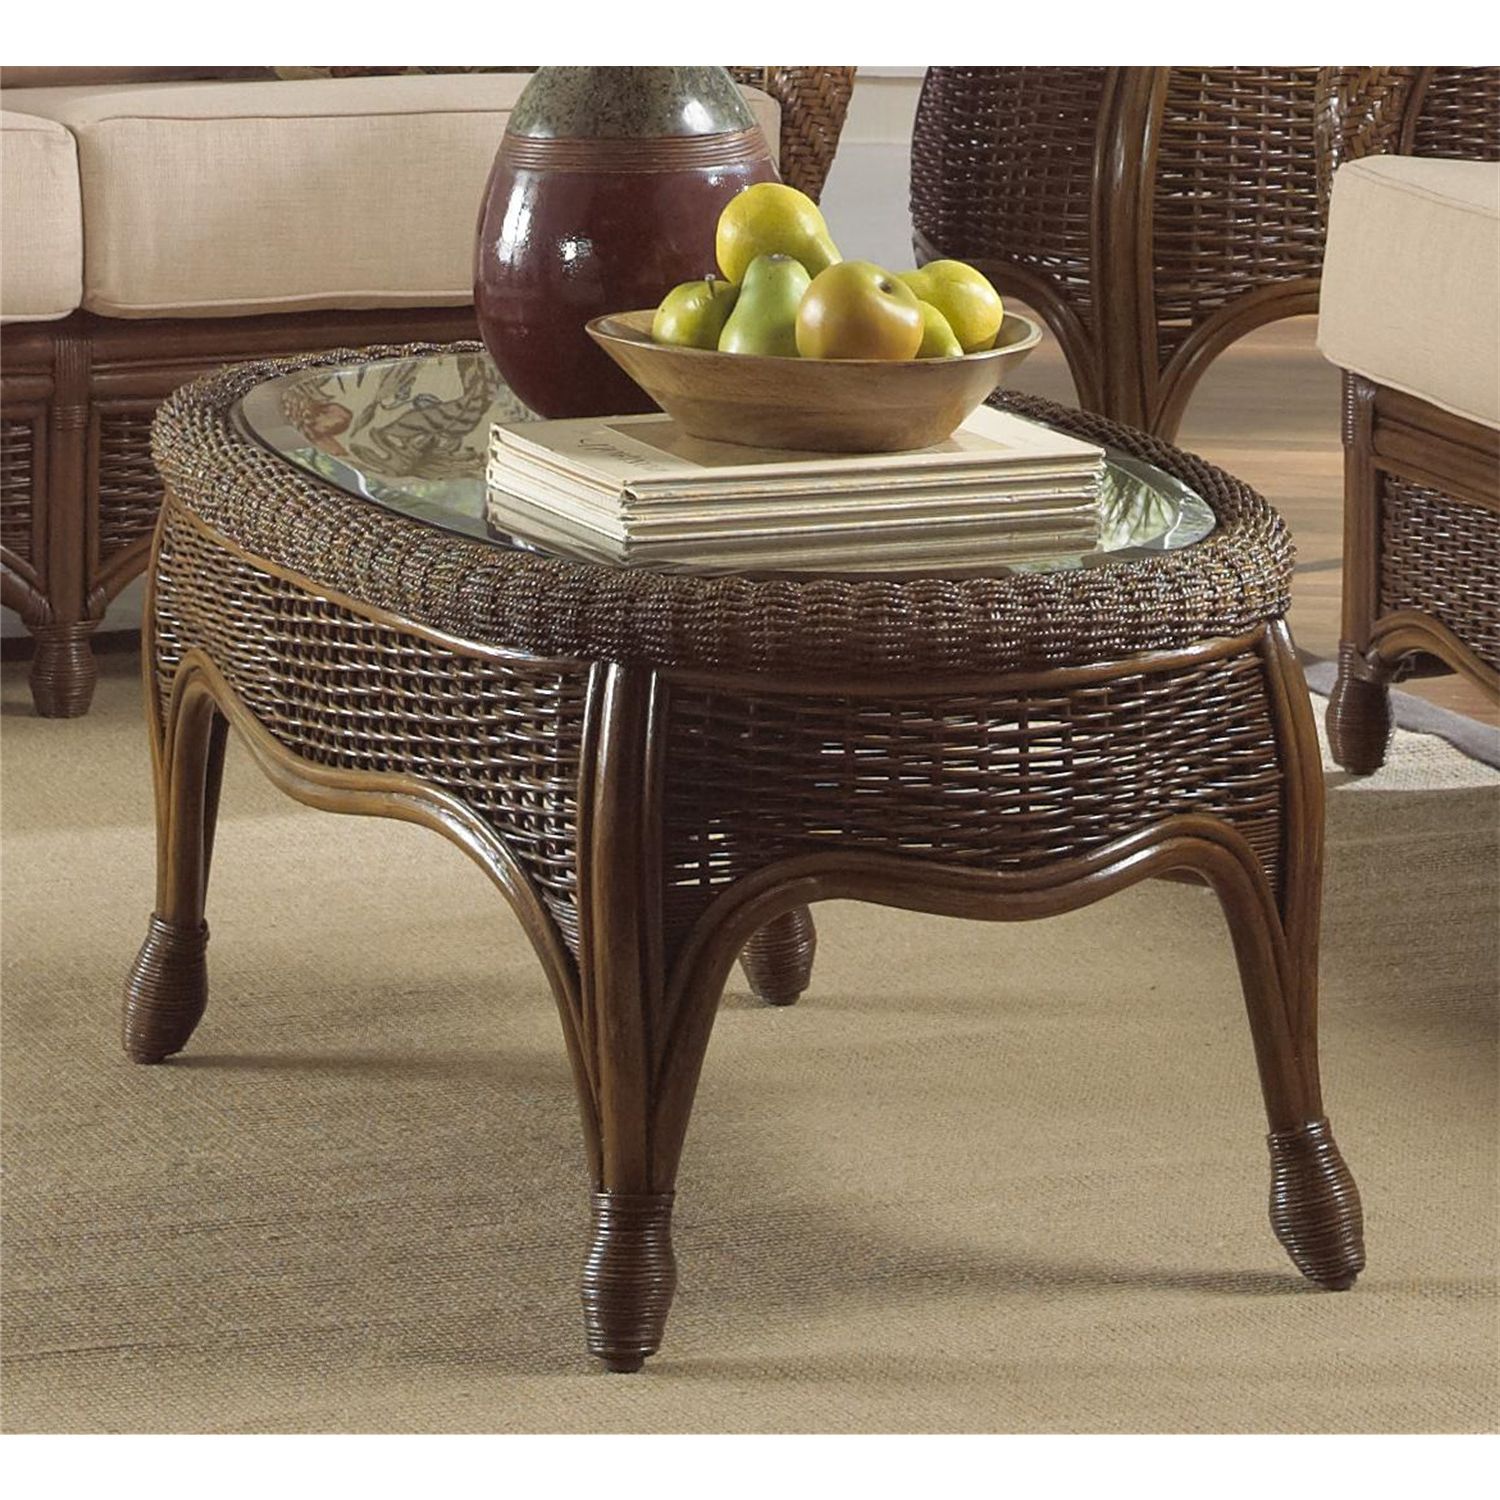 Rattan Coffee Tables Within Well Known Rattan Coffee Tables – Ideas On Foter (View 5 of 15)